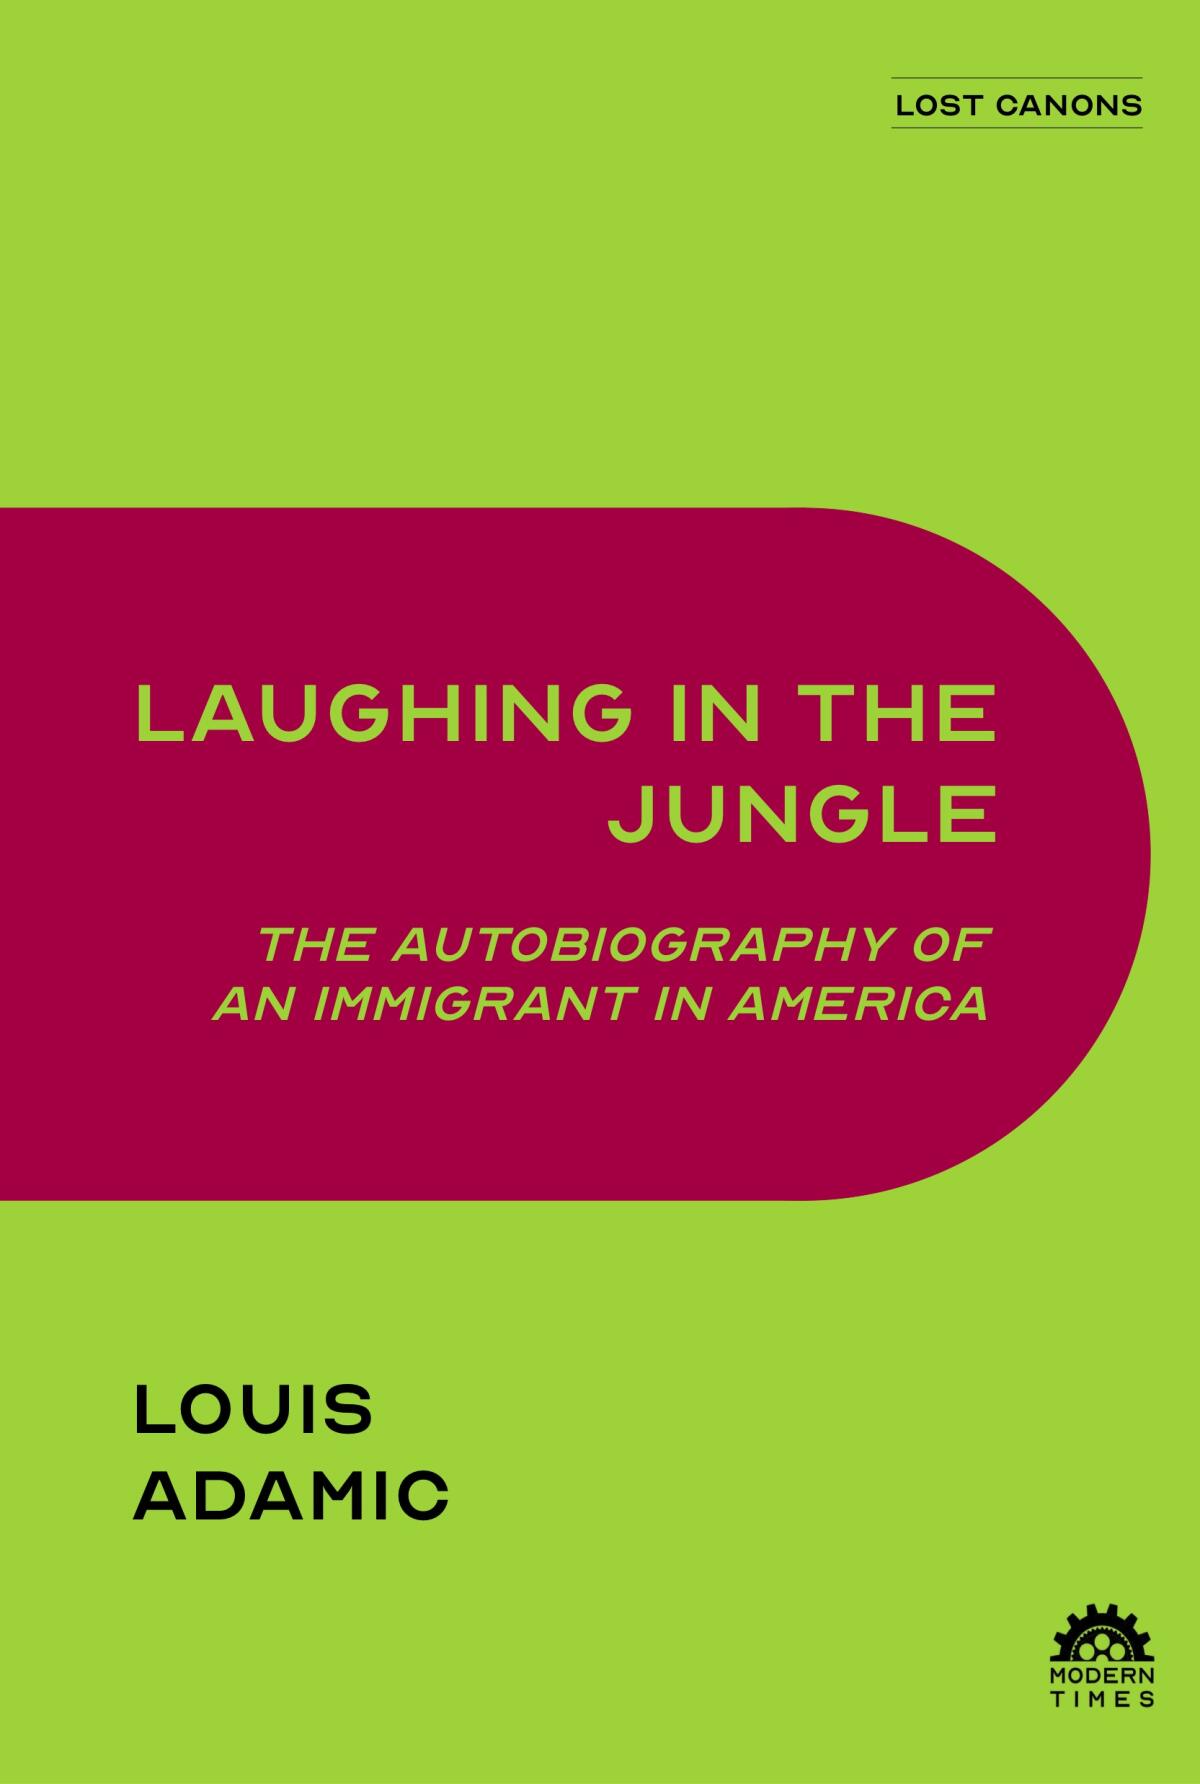 "Laughing in the Jungle: The Autobiography of an Immigrant in America" by Louis Adamic